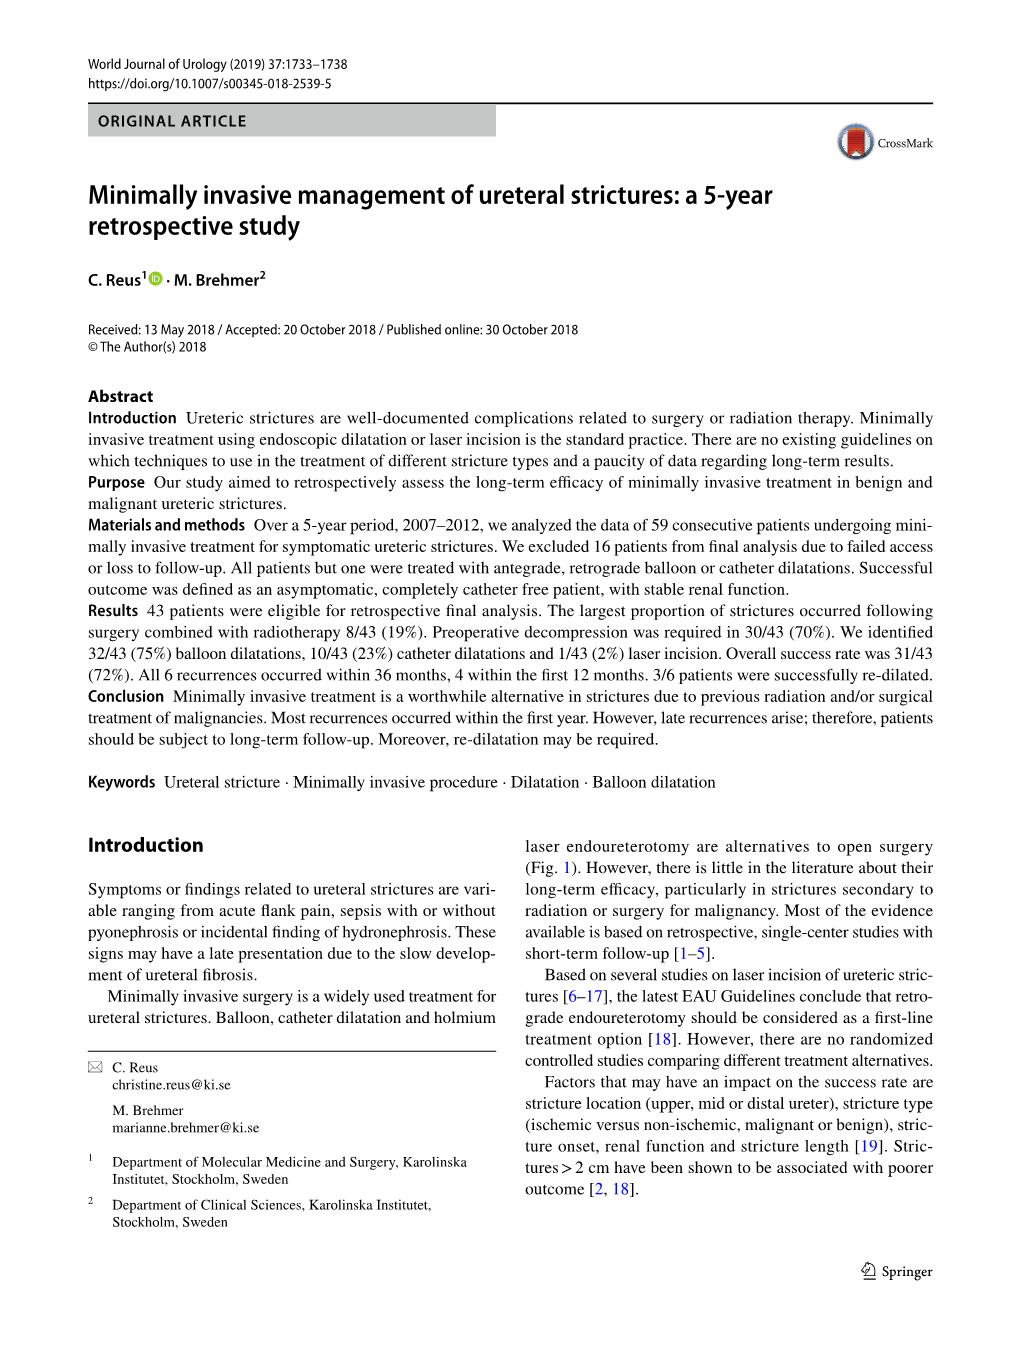 Minimally Invasive Management of Ureteral Strictures: a 5-Year